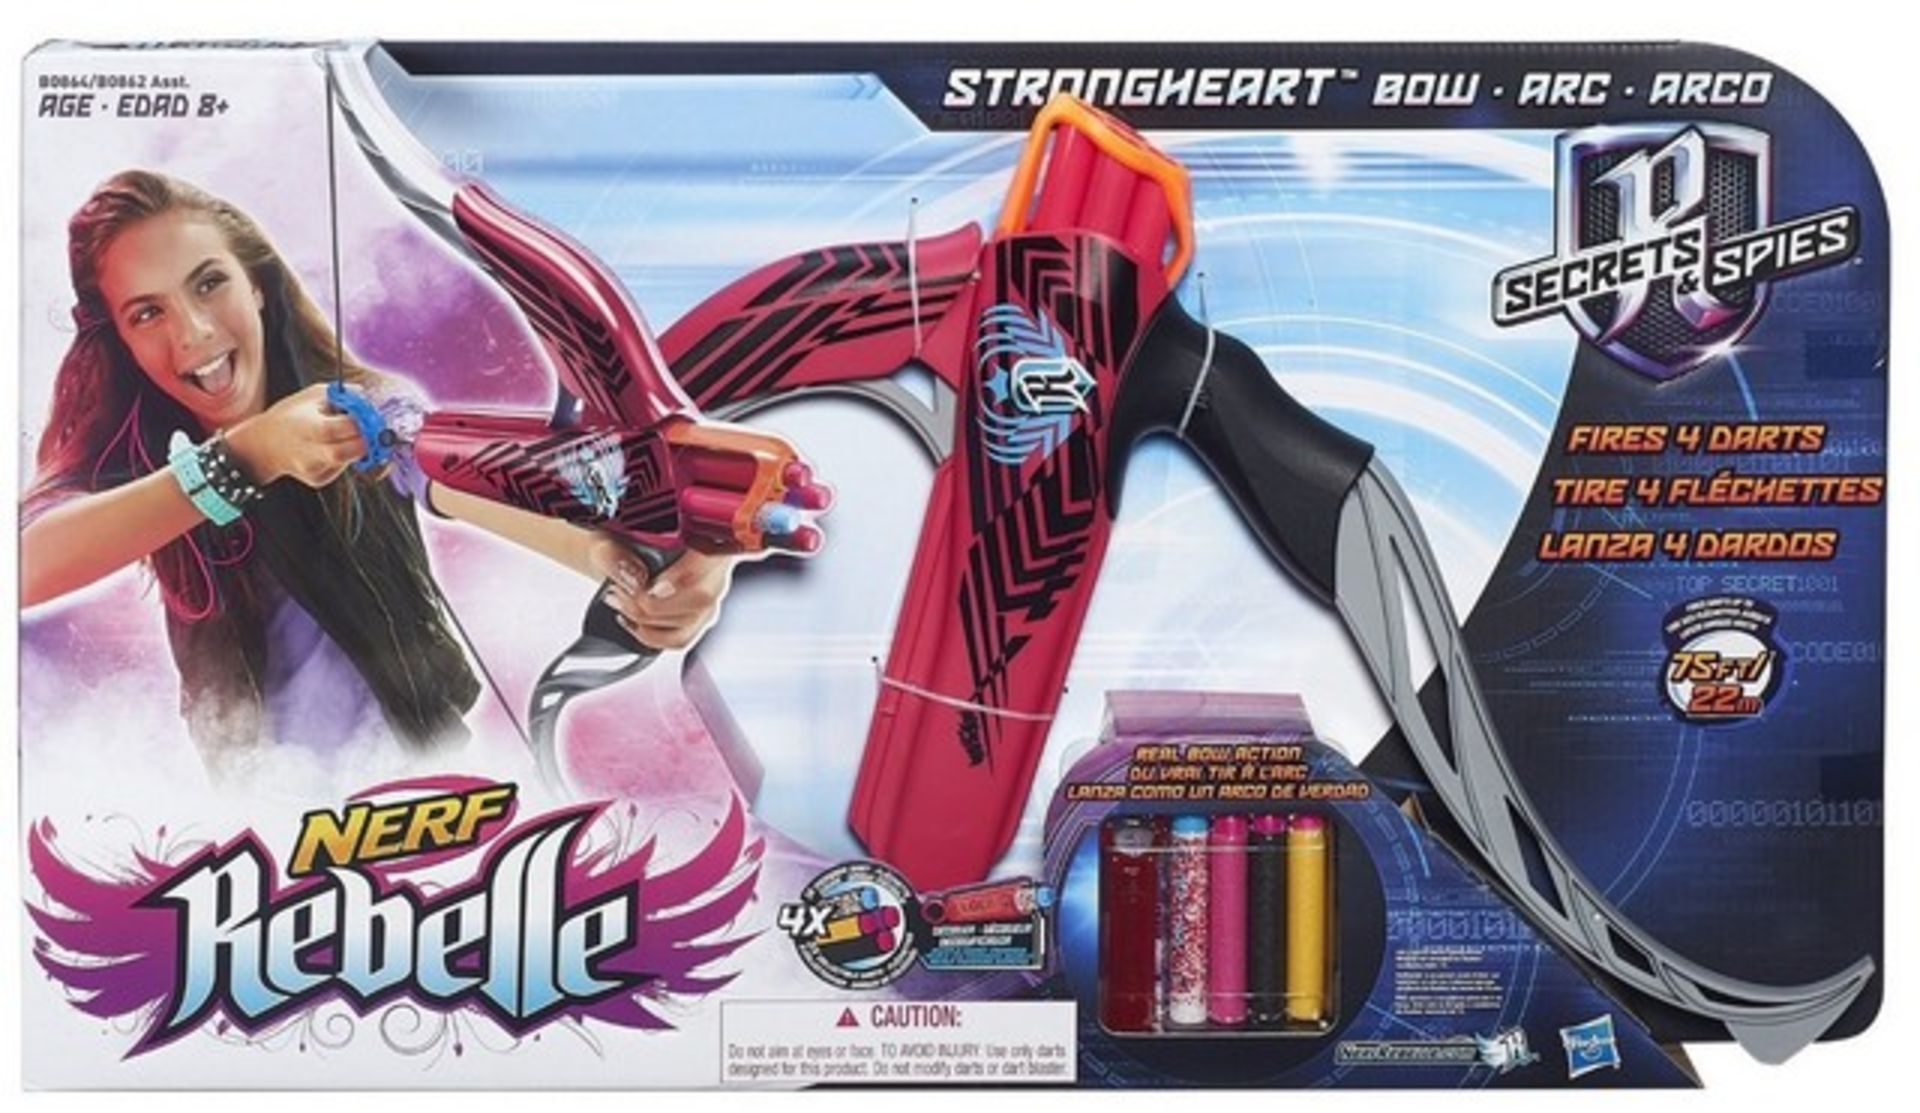 + VAT Brand New Hasbro Nerf Rebelle Secrets And Spies Strongheart Bow With 4 Darts And Decoder Age